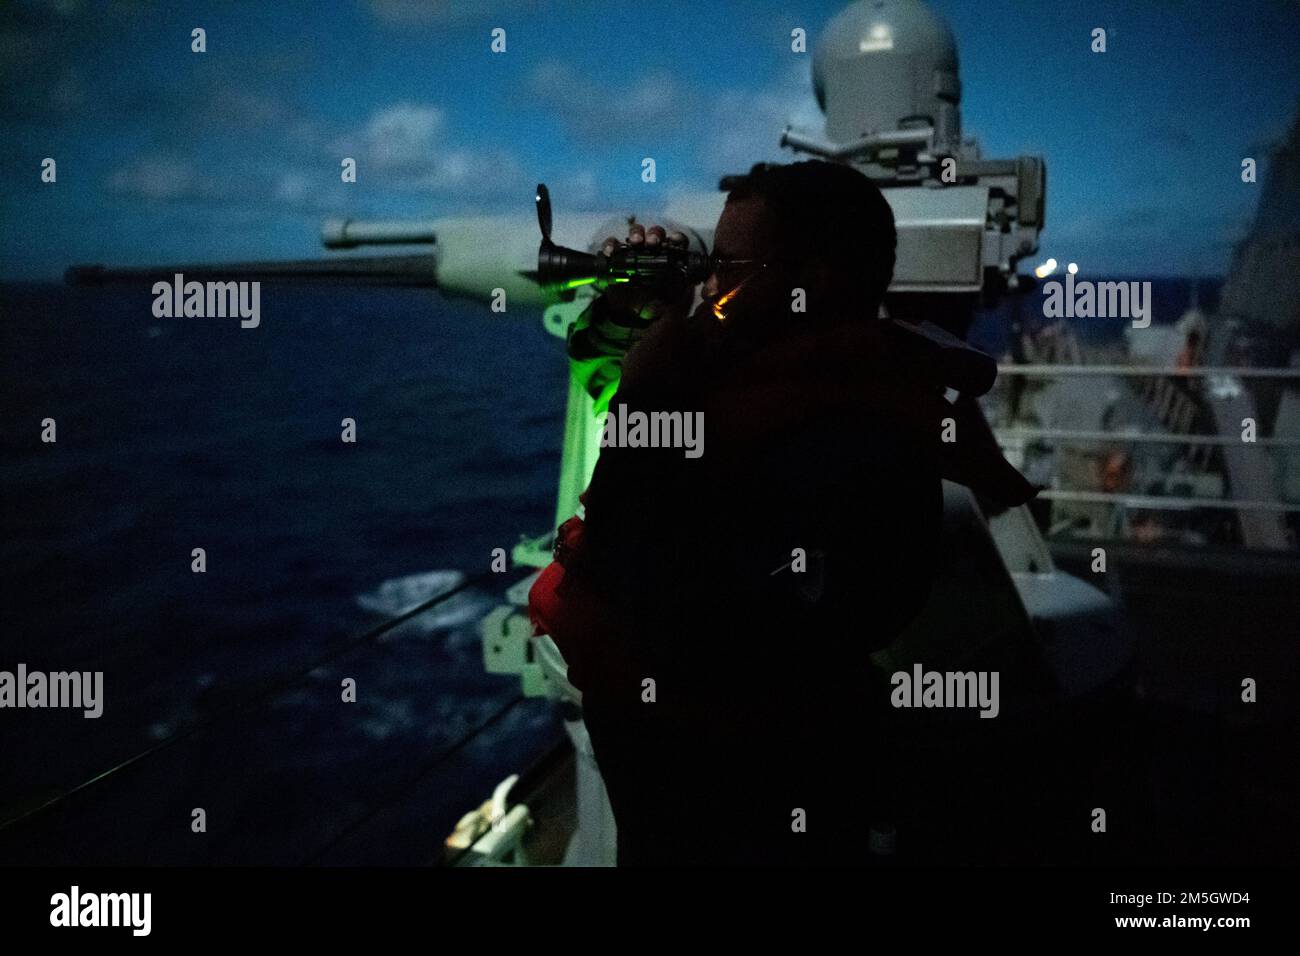 PHILIPPINE SEA (March 17, 2022) Gunner’s Mate 2nd Class Taquan Taylor, from Mobile, Alabama, mans the Mark 38 – 25 mm machine gun aboard the Arleigh Burke-class guided-missile destroyer USS Dewey (DDG 105) while conducting routine operations underway in the U.S. 7th Fleet area of responsibility. Dewey is assigned to Destroyer Squadron (DESRON) 15 and is underway supporting a free and open Indo-Pacific. CTF 71/DESRON 15 is the Navy’s largest forward-deployed DESRON and the U.S. 7th Fleet’s principal surface force. Stock Photo